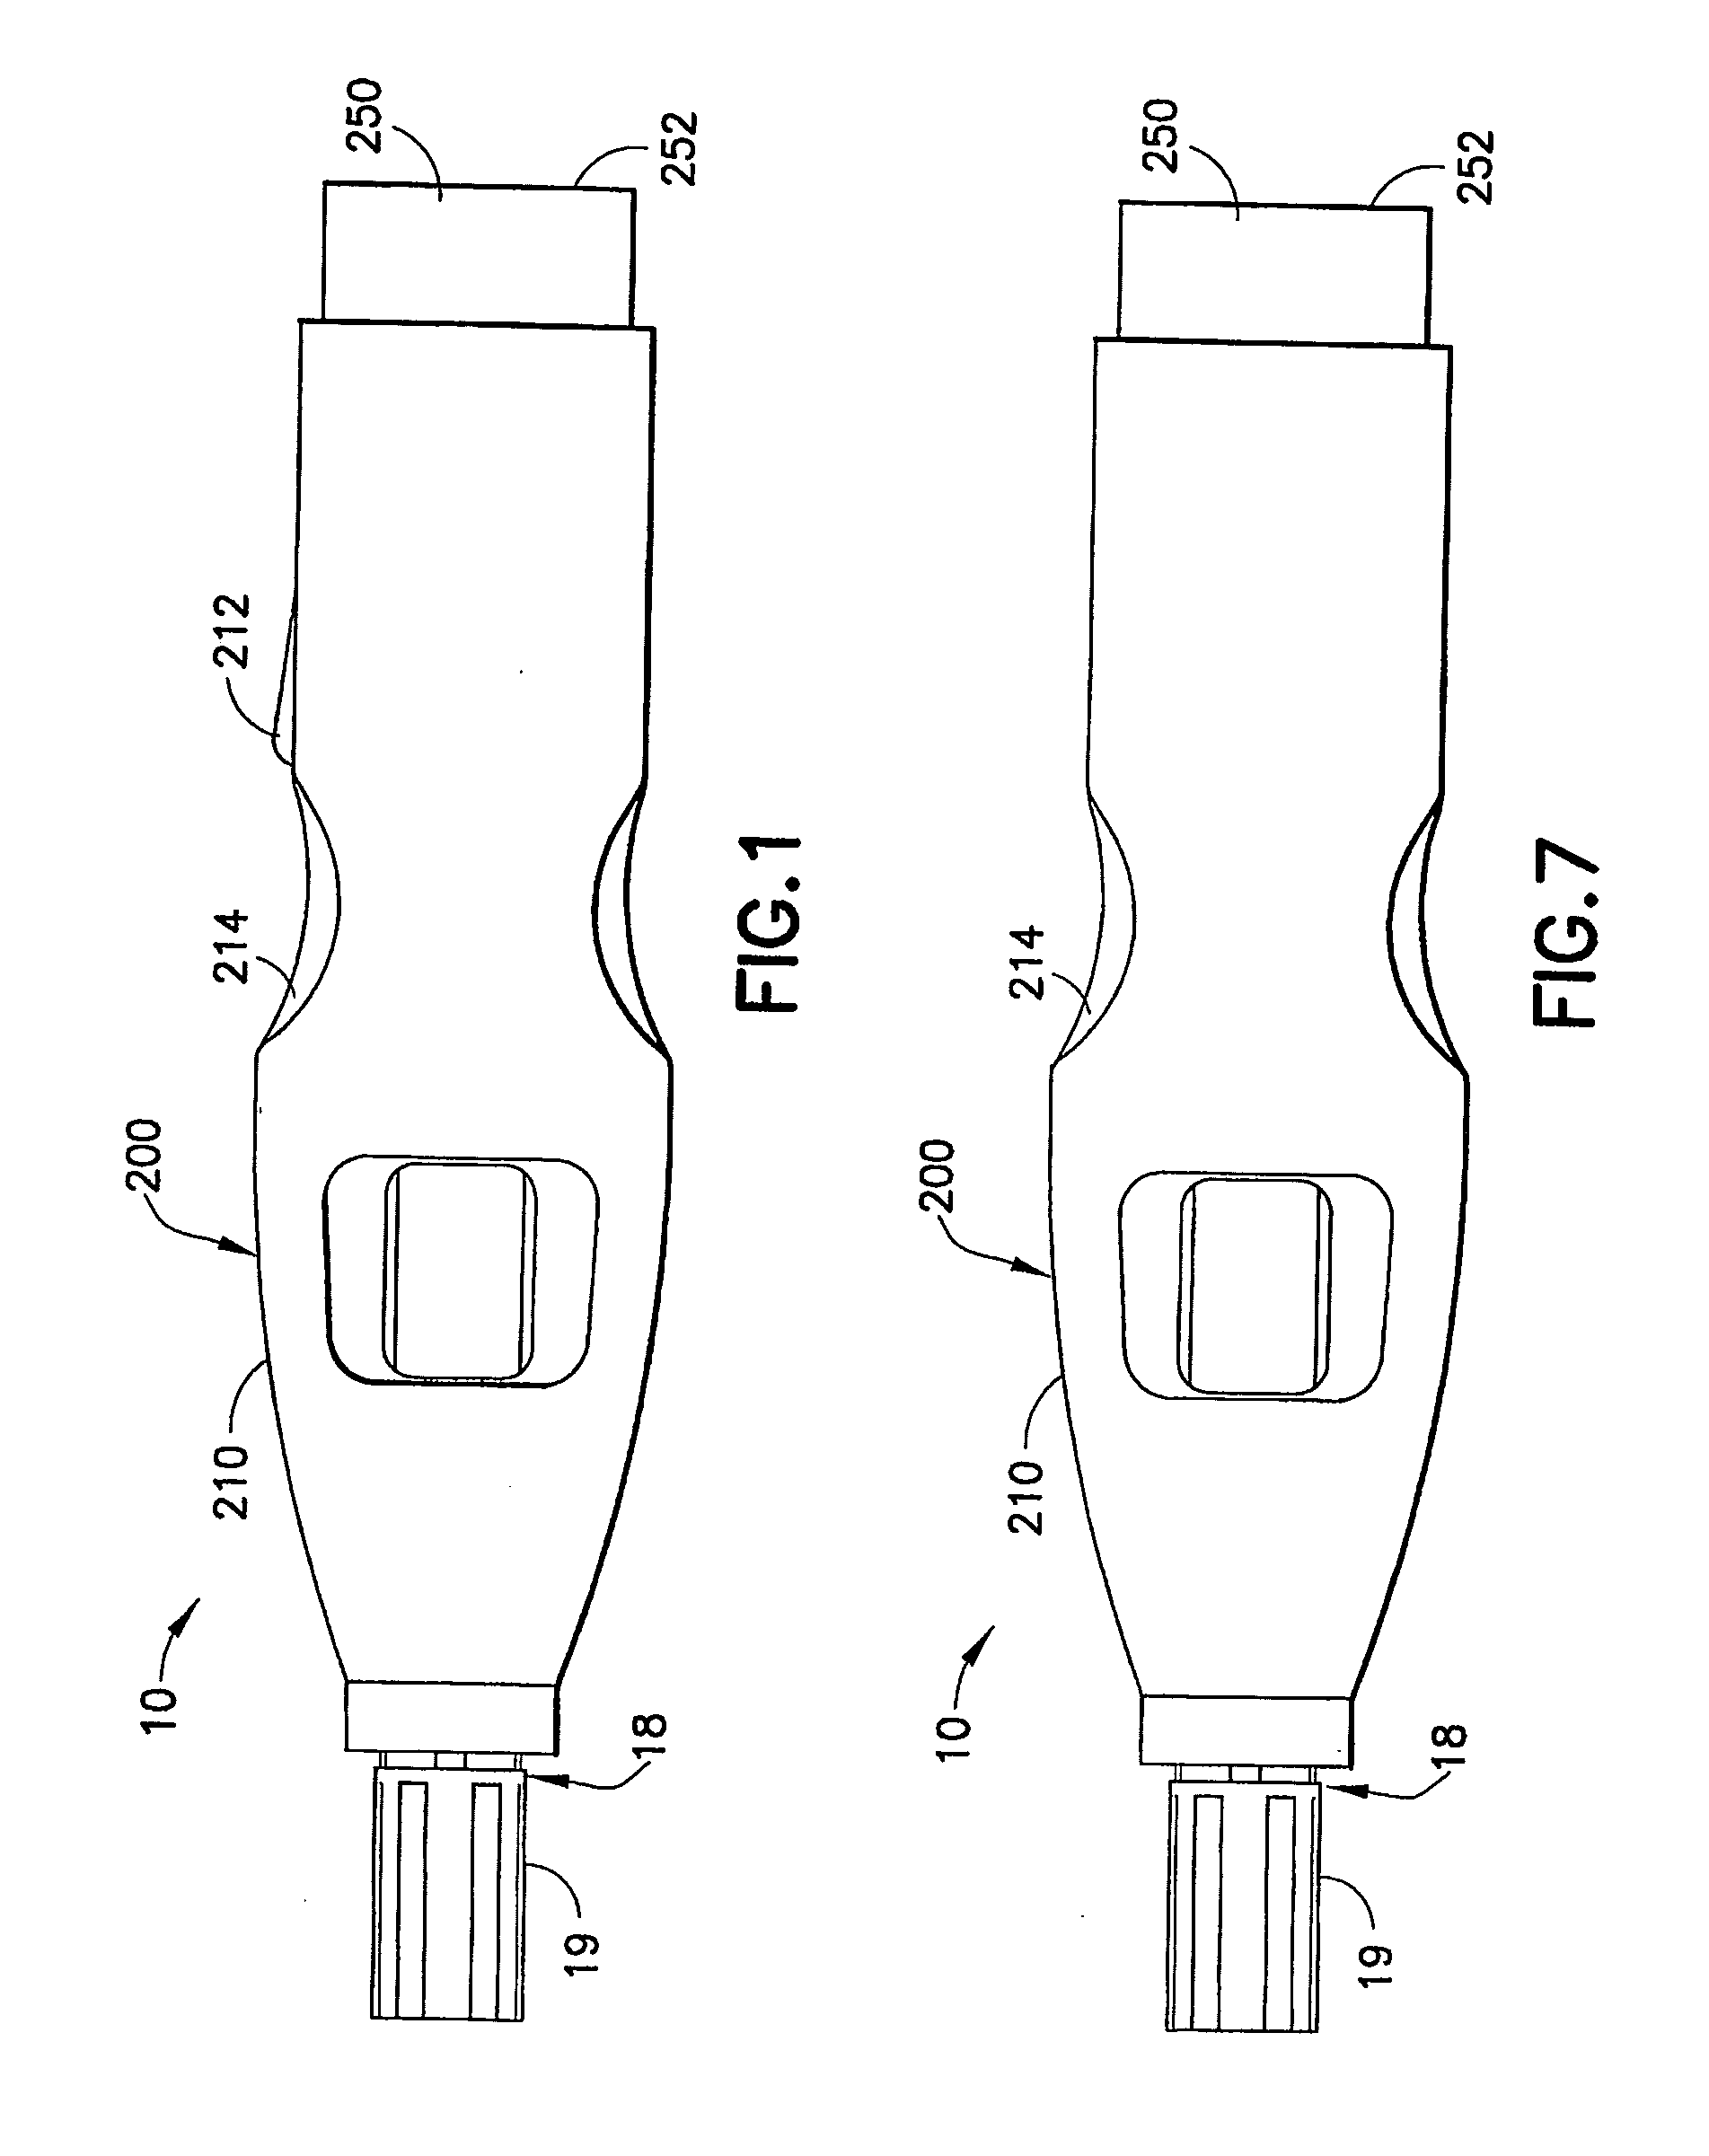 Holder with safety shield for a drug delivery device